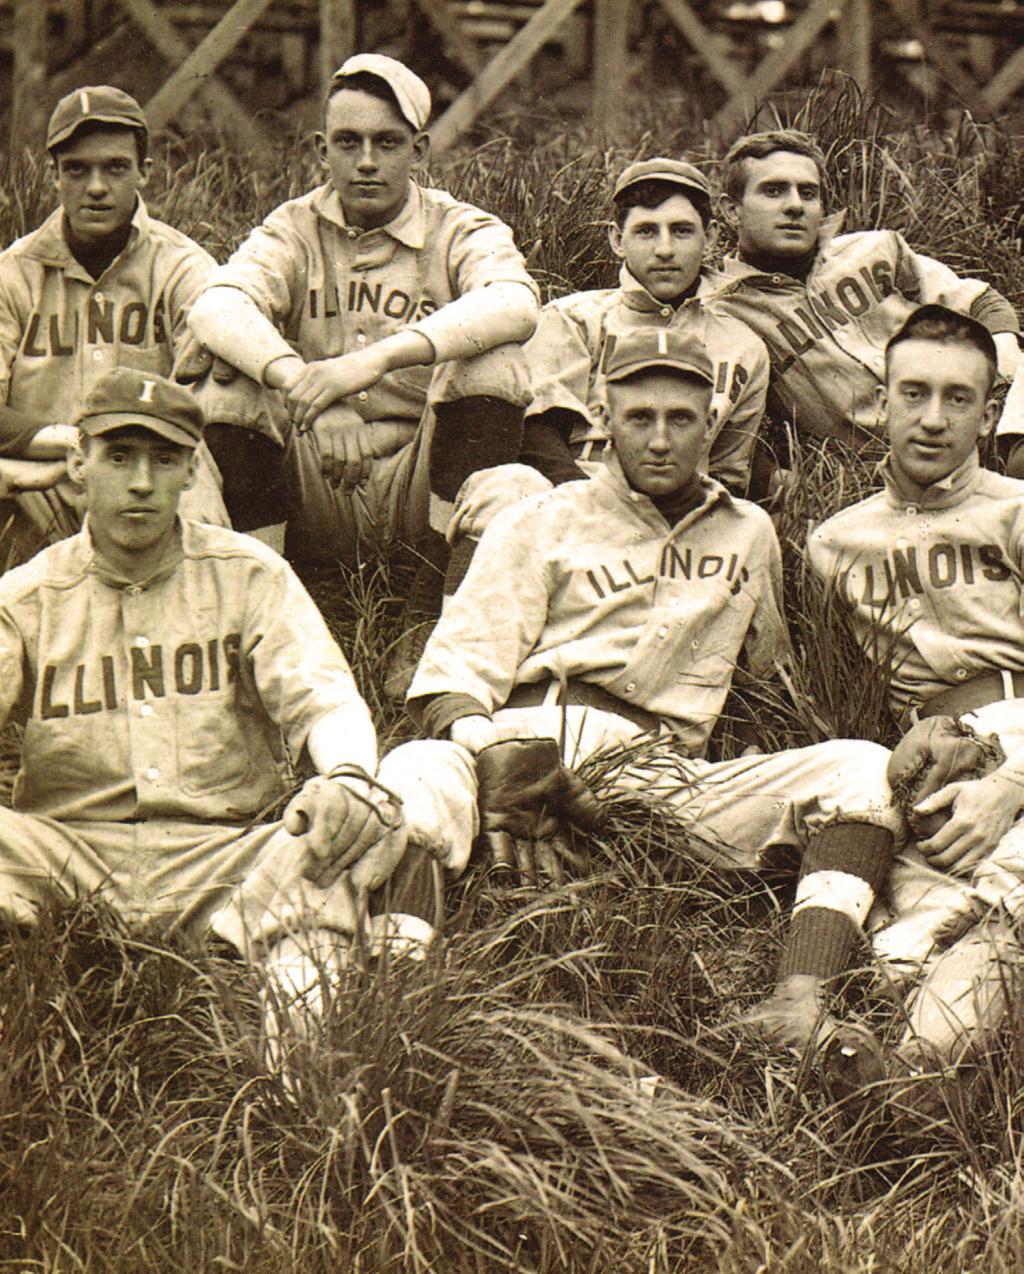 The first intercollegiate varsity competition at Illinois College took place in